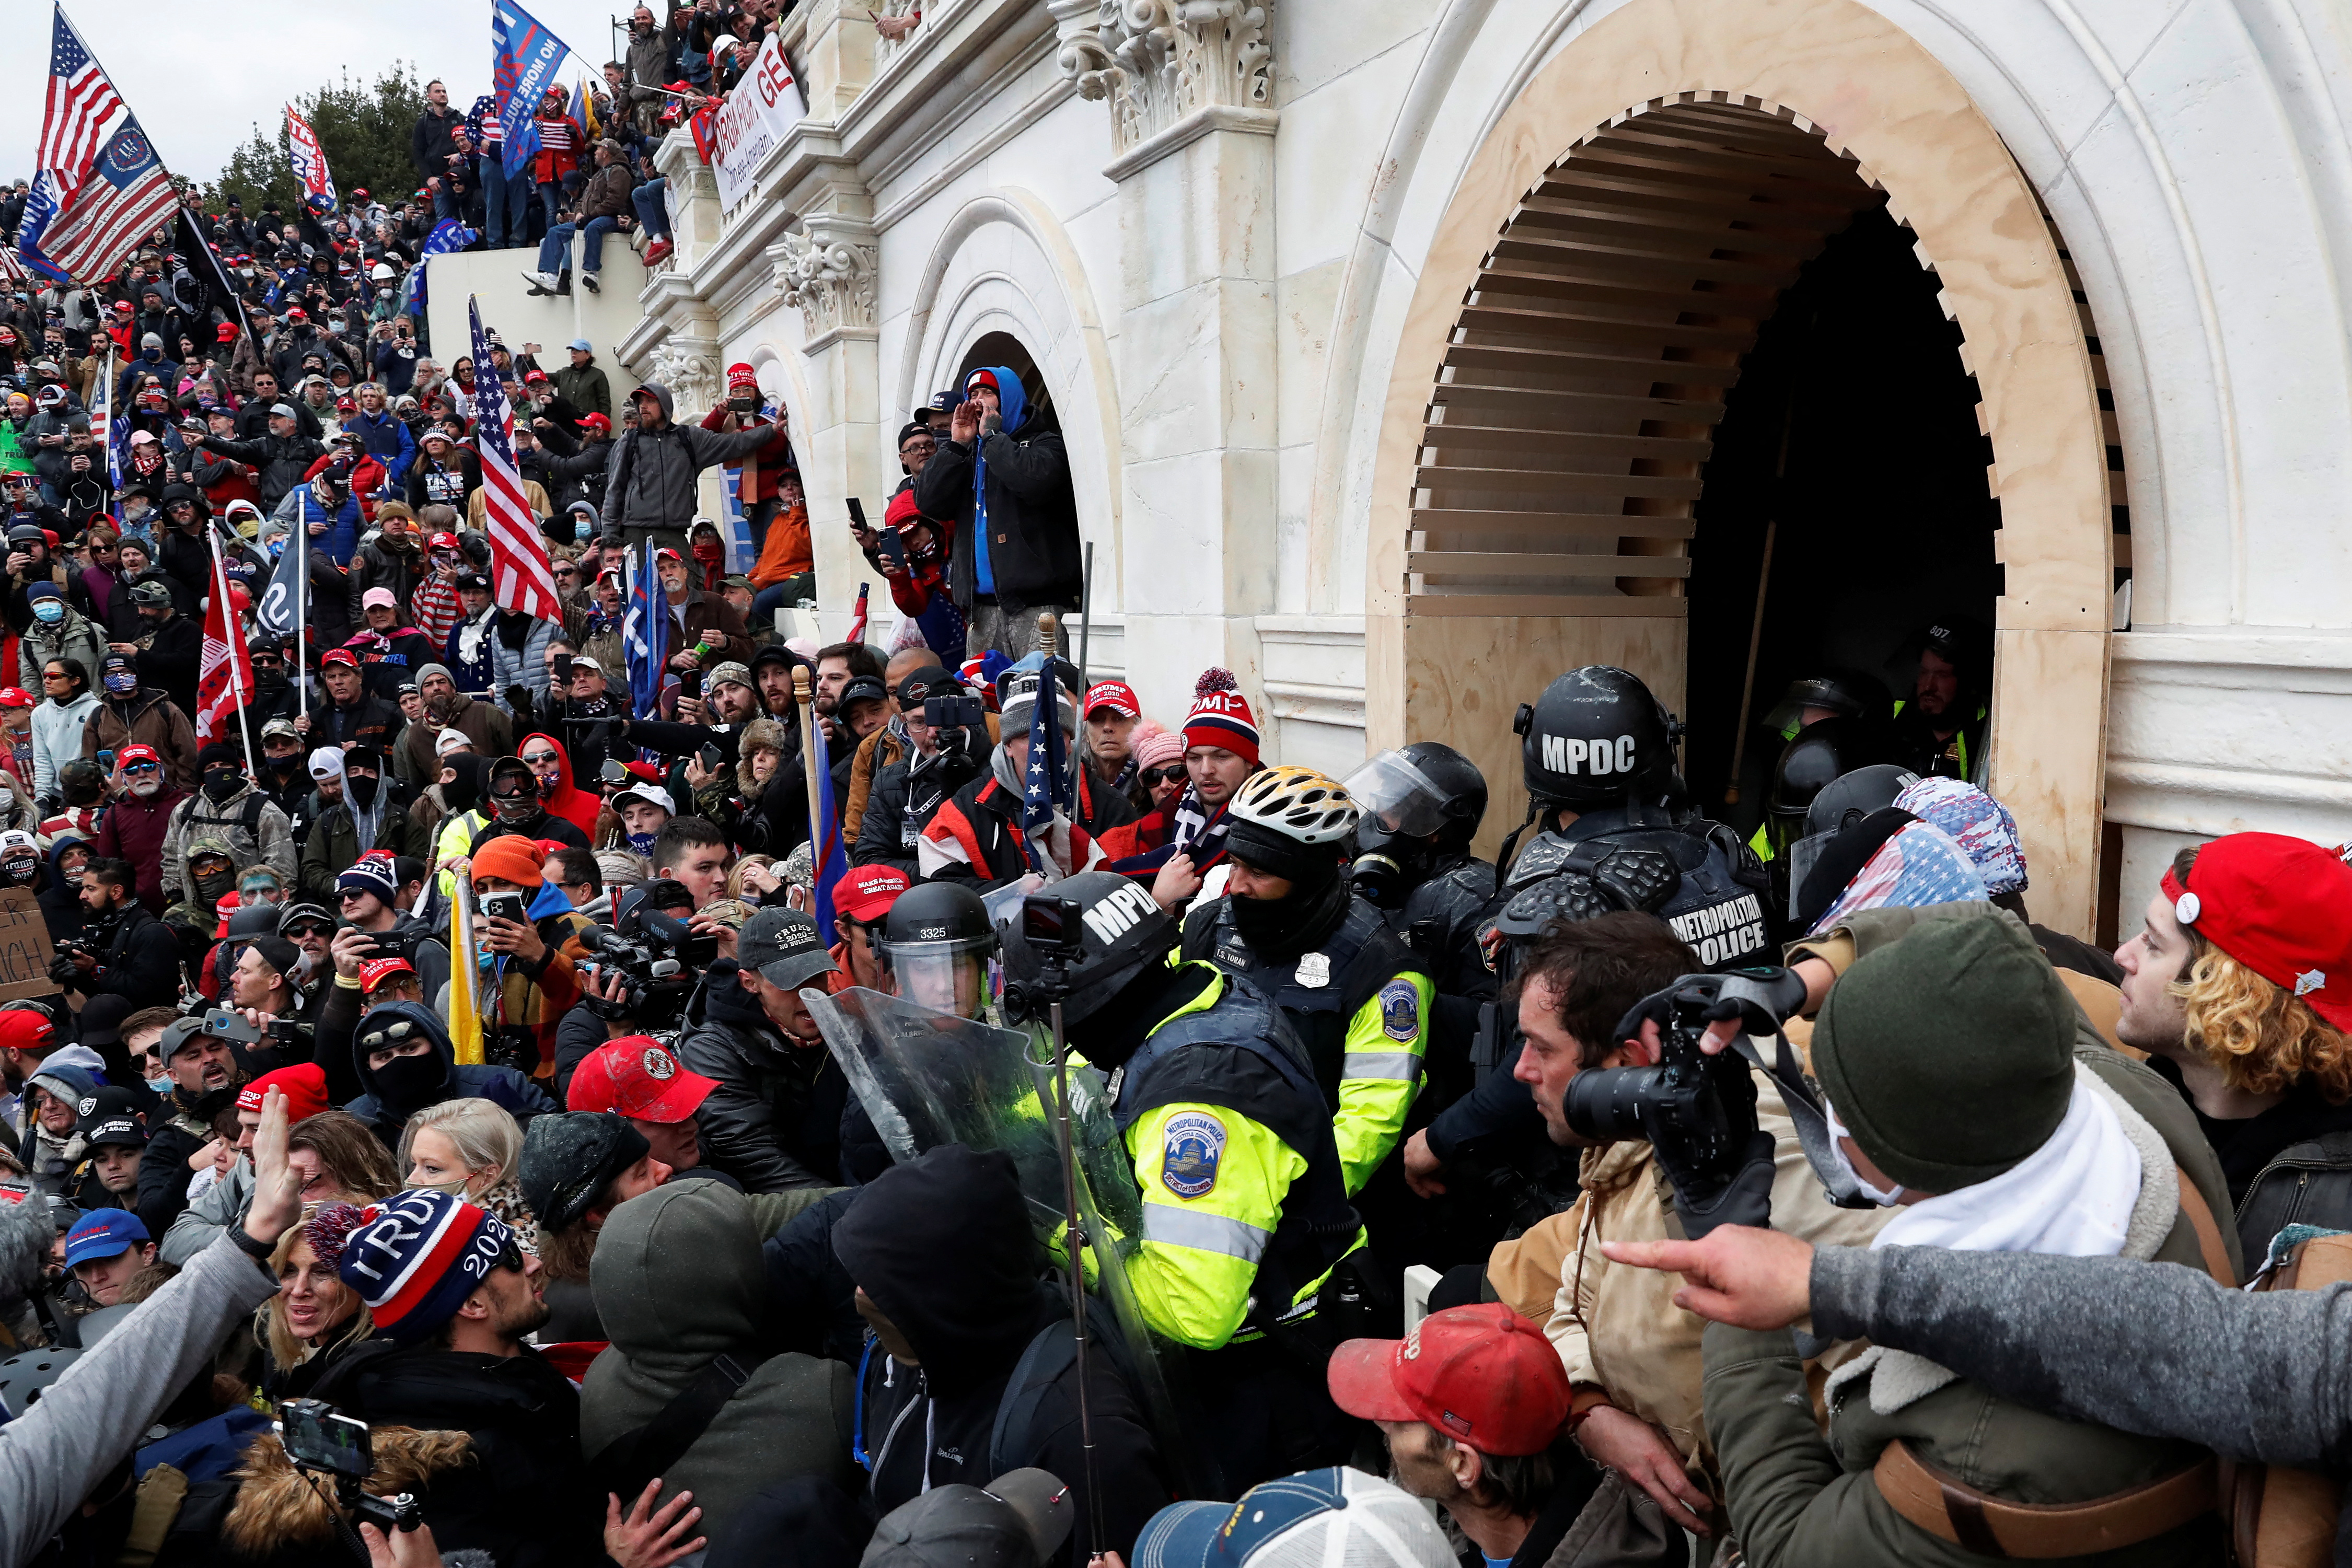 Pro-Trump protesters clash with police during a rally to contest the certification of the 2020 U.S. presidential election results by the U.S. Congress, at the U.S. Capitol Building in Washington